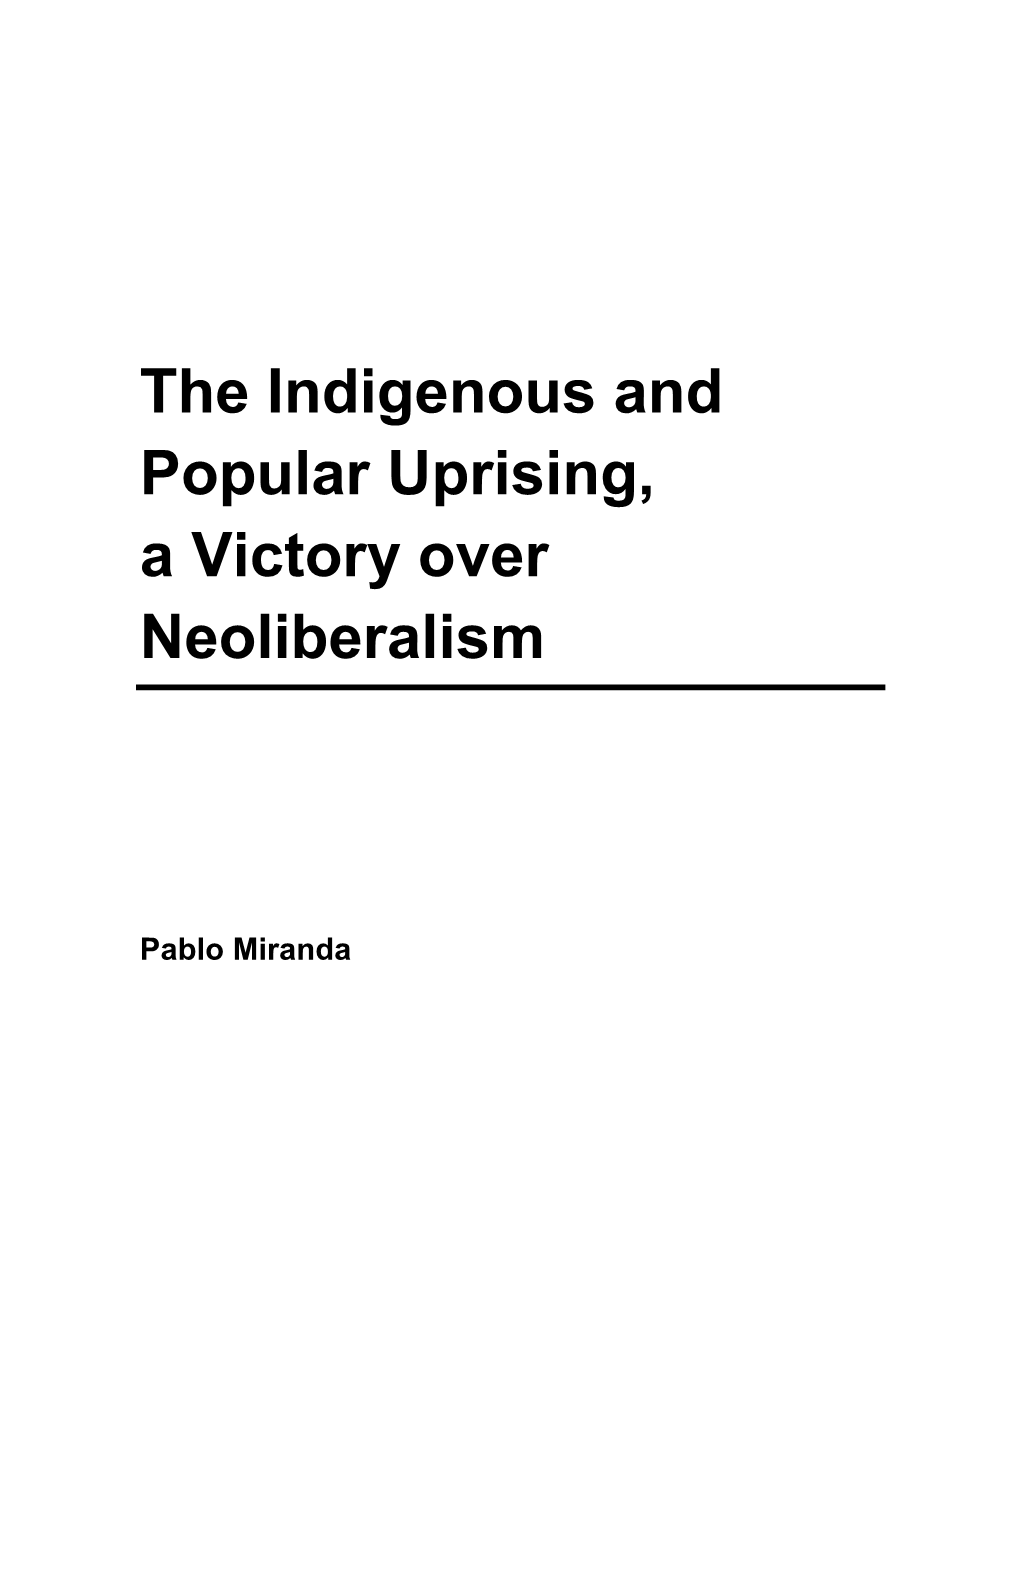 The Indigenous and Popular Uprising, a Victory Over Neoliberalism